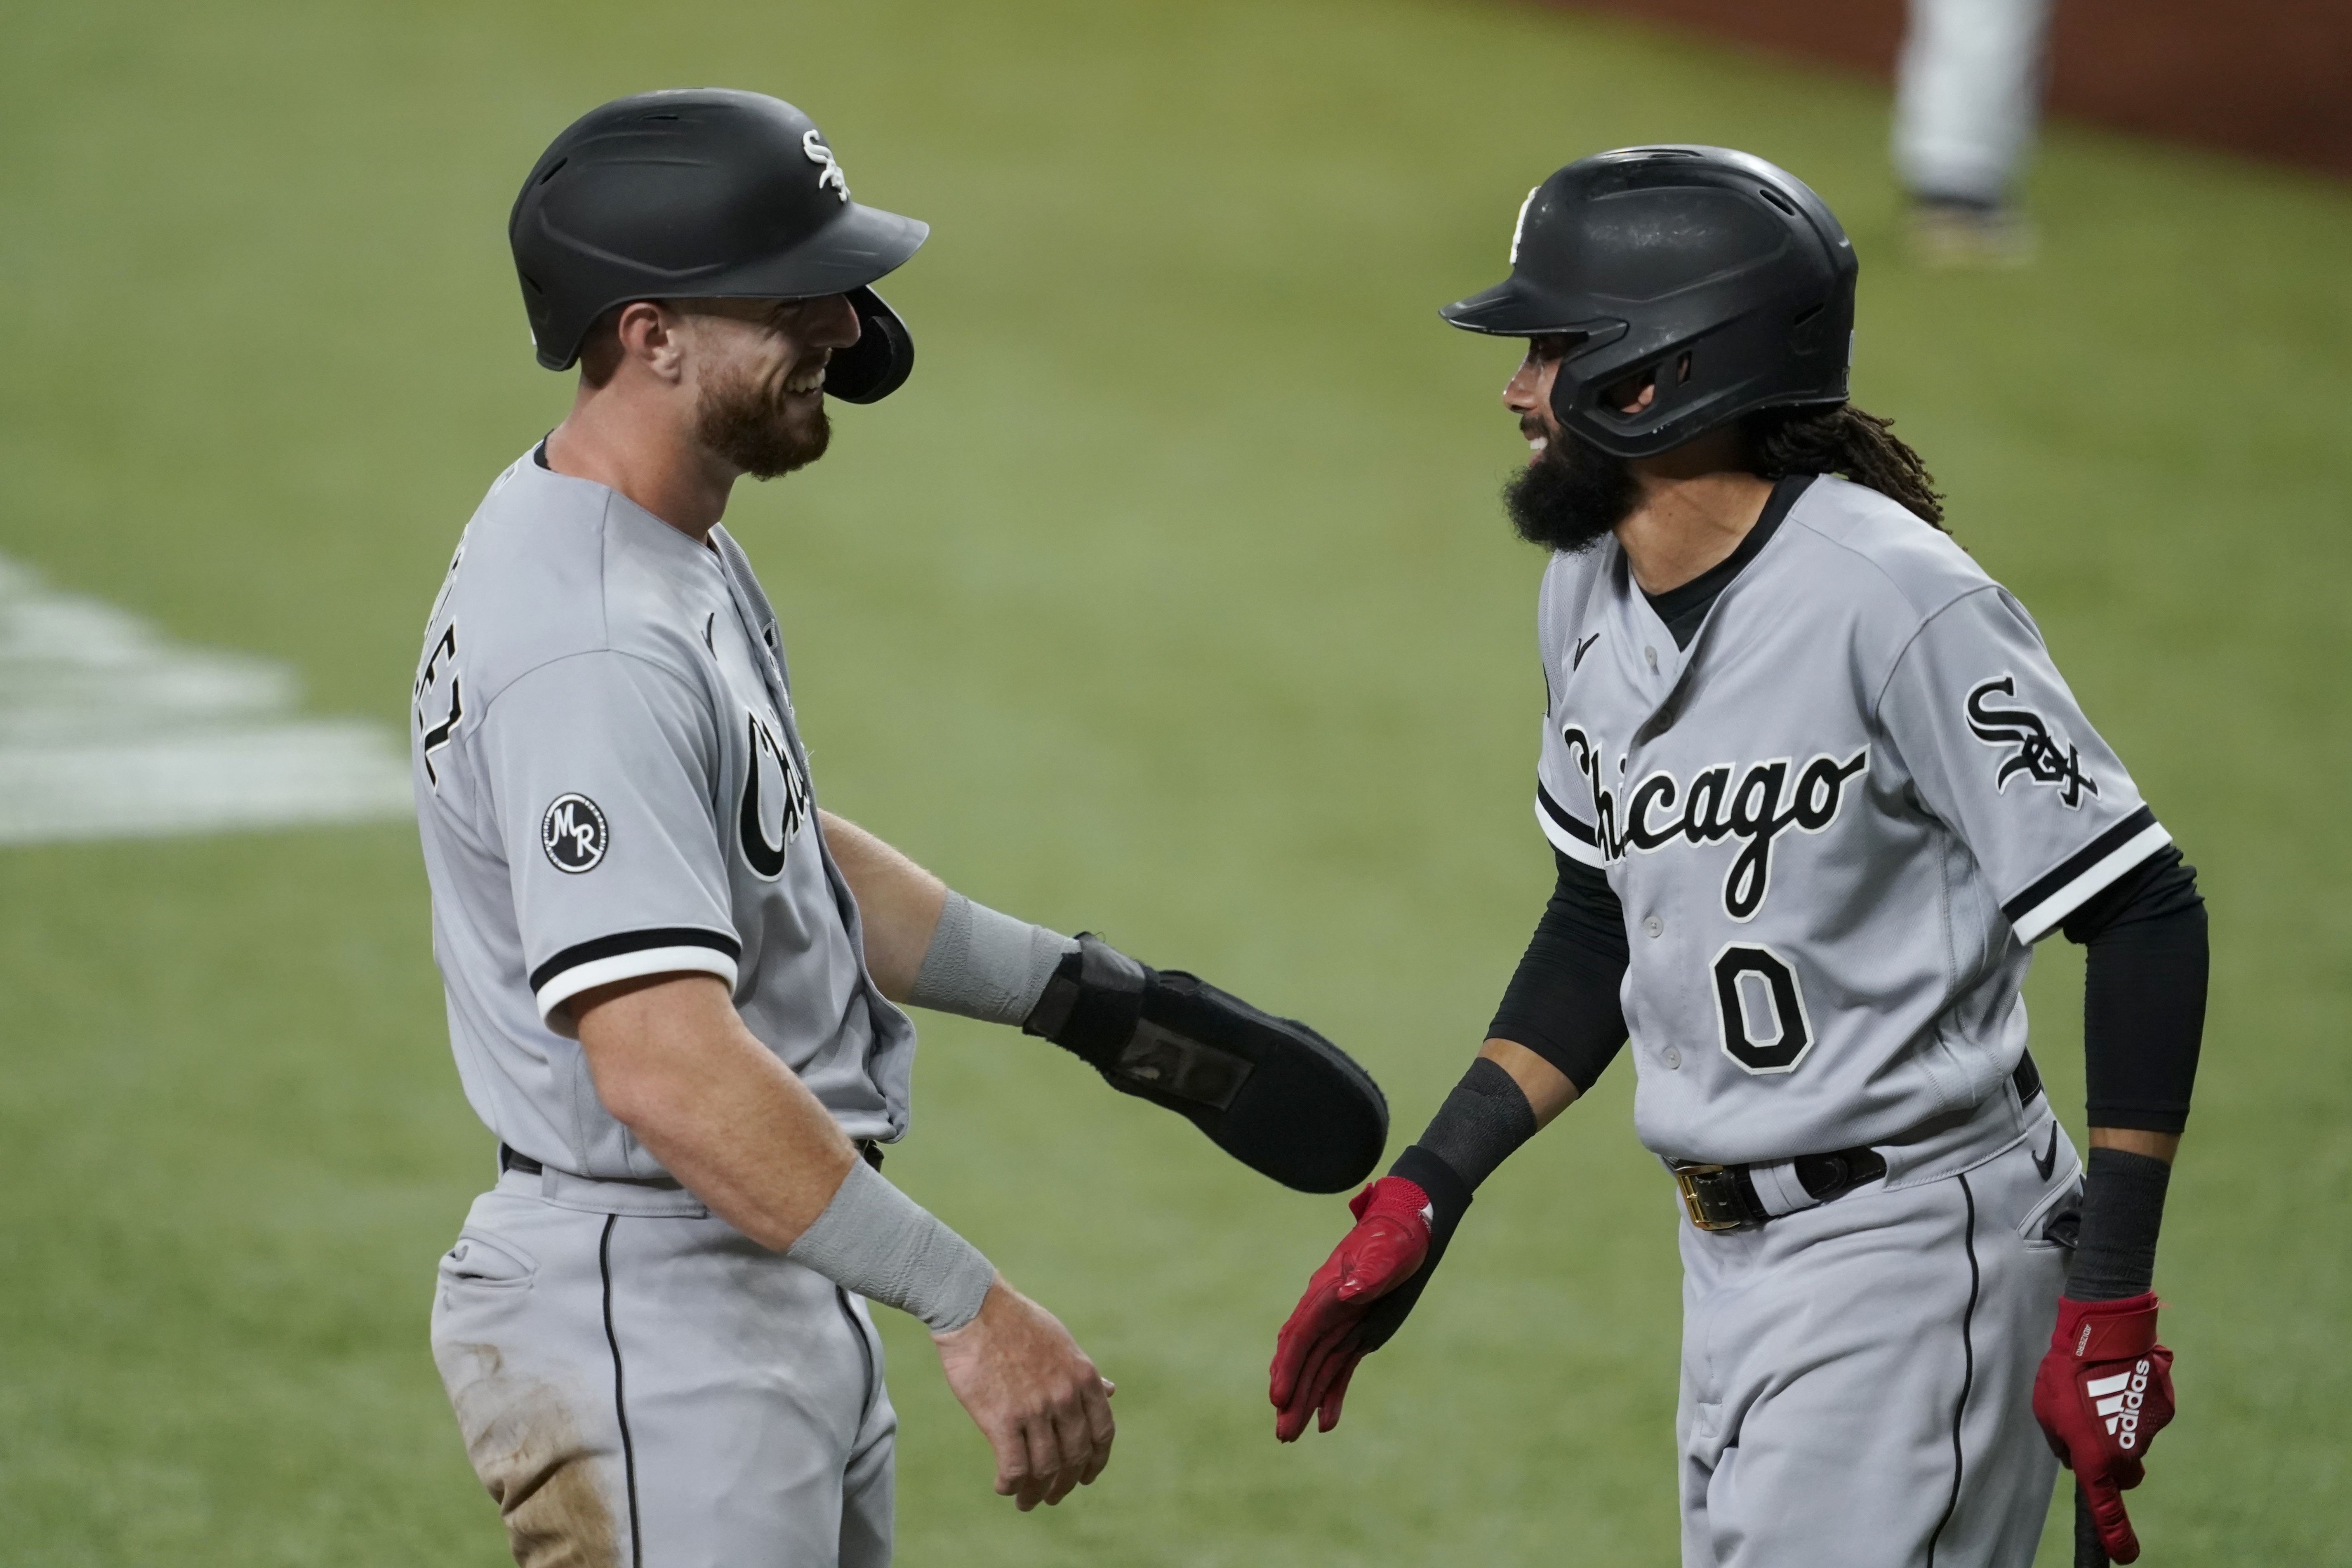 White Sox blank Rangers 8-0 as magic number drops to 5